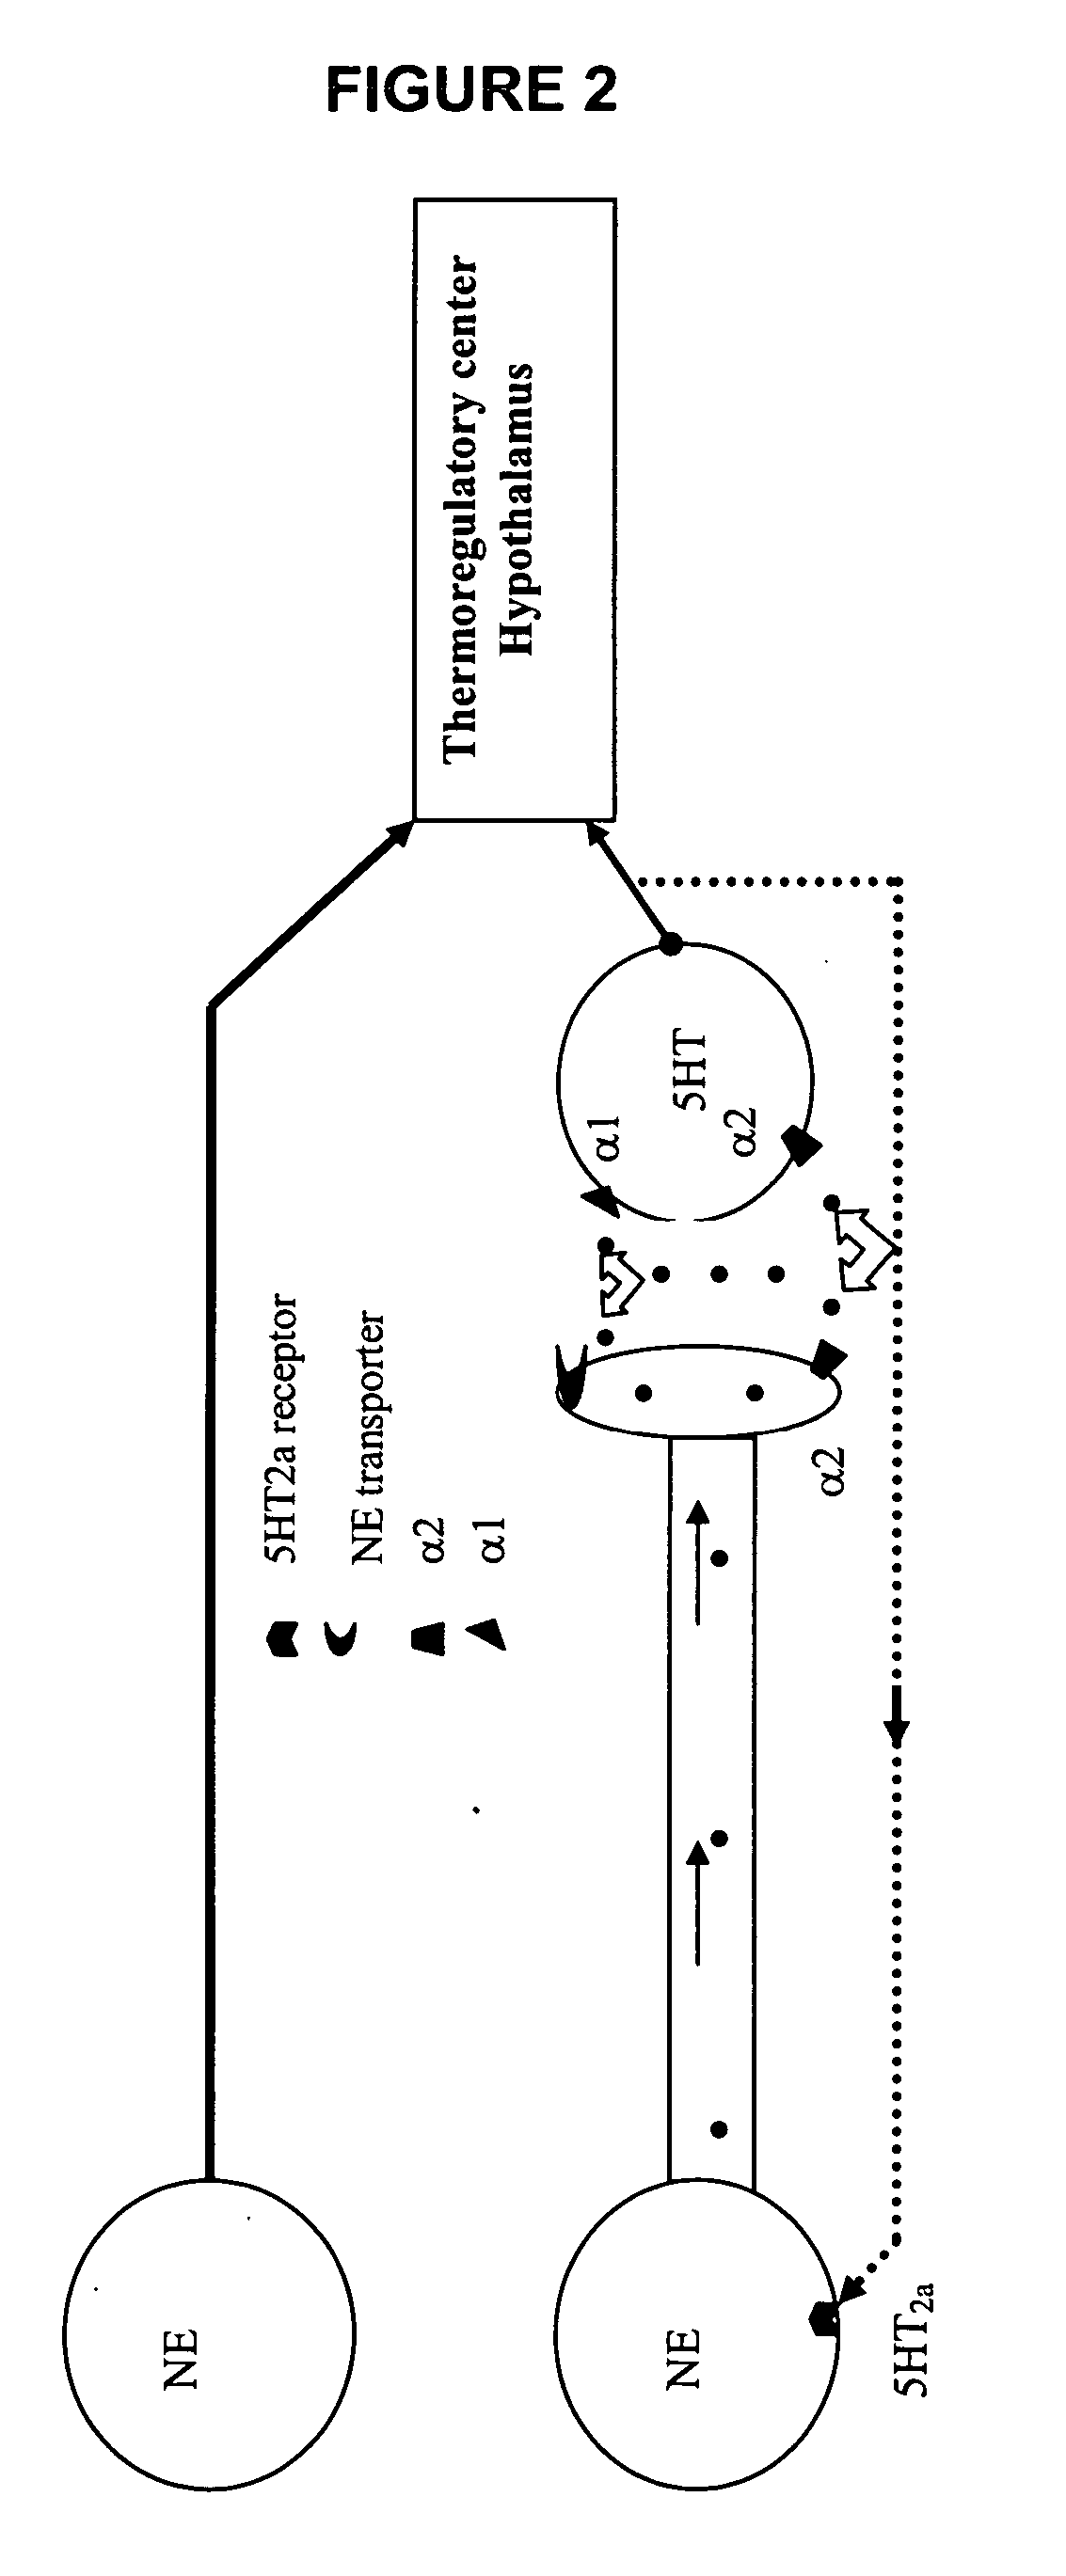 Substituted propylamine derivatives and methods of their use